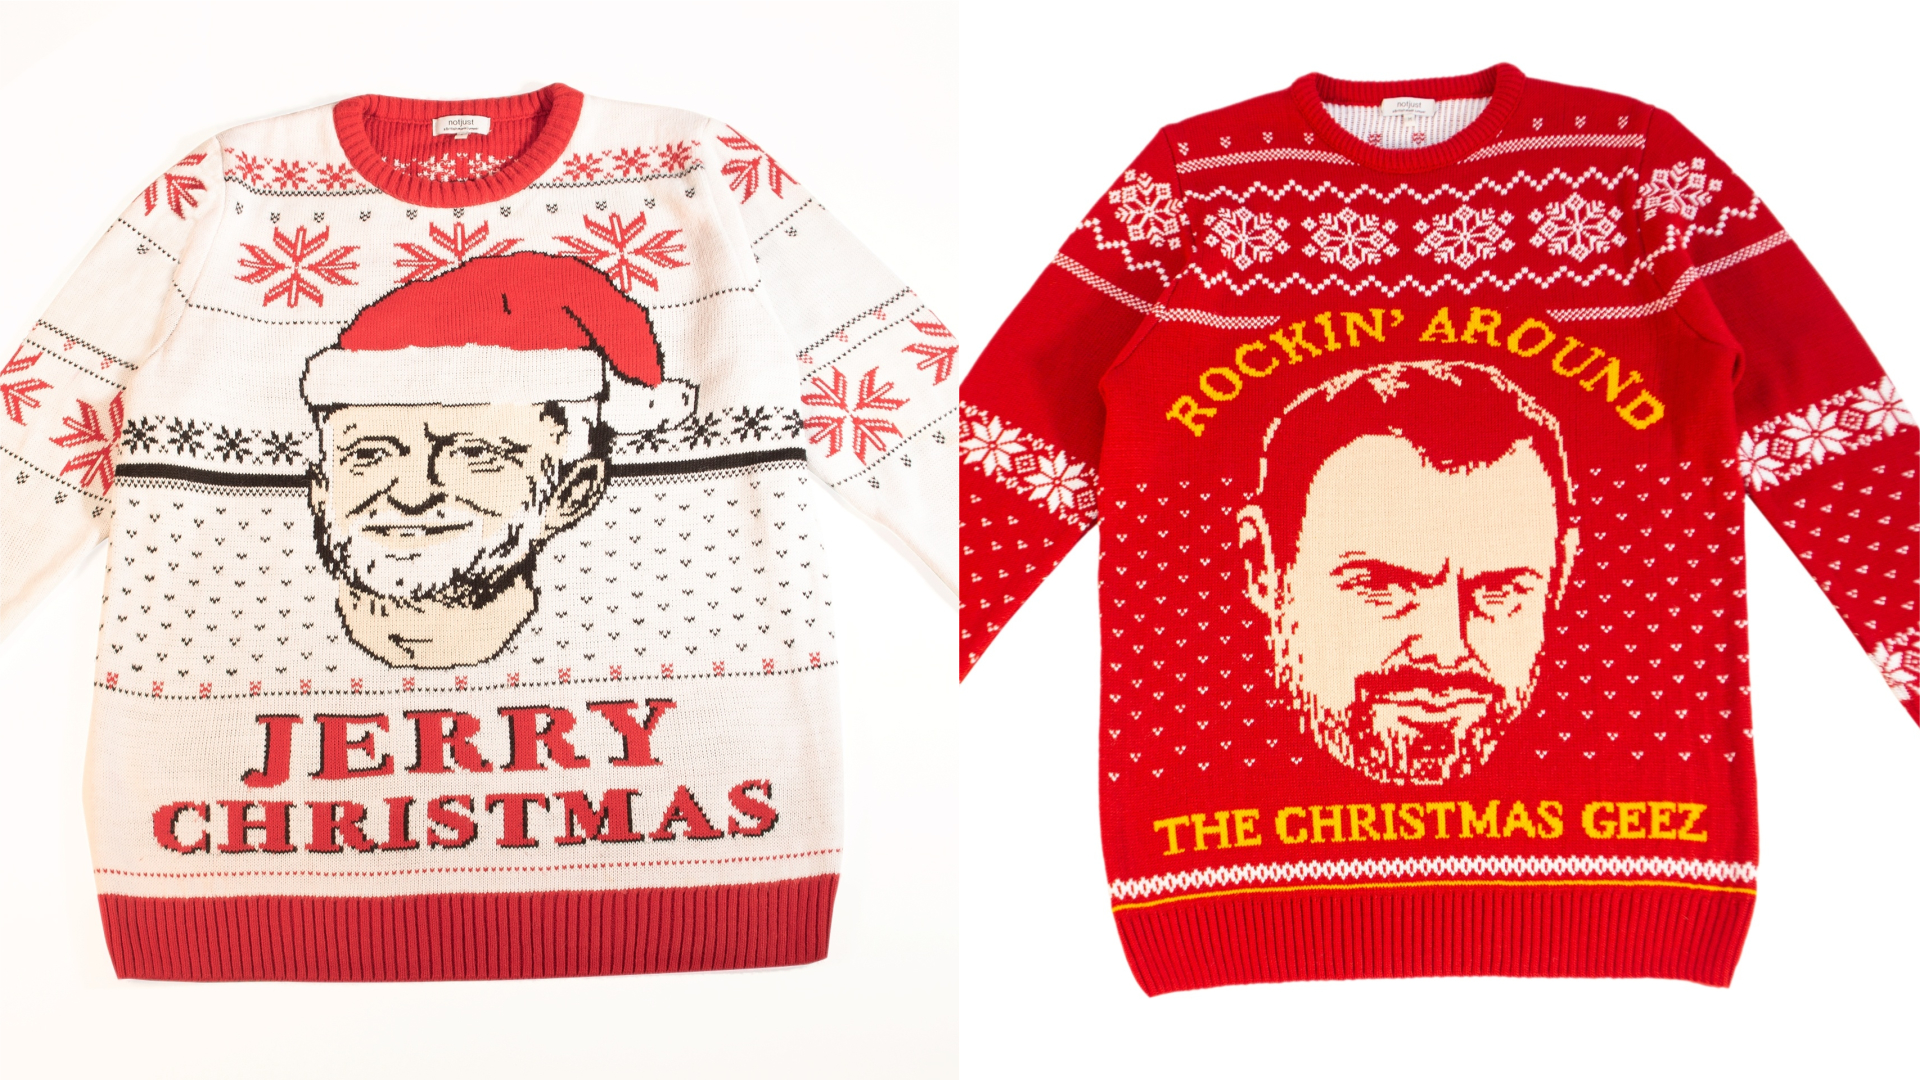 Jeremy Corbyn and Danny Dyer Christmas jumpers from notjust clothing